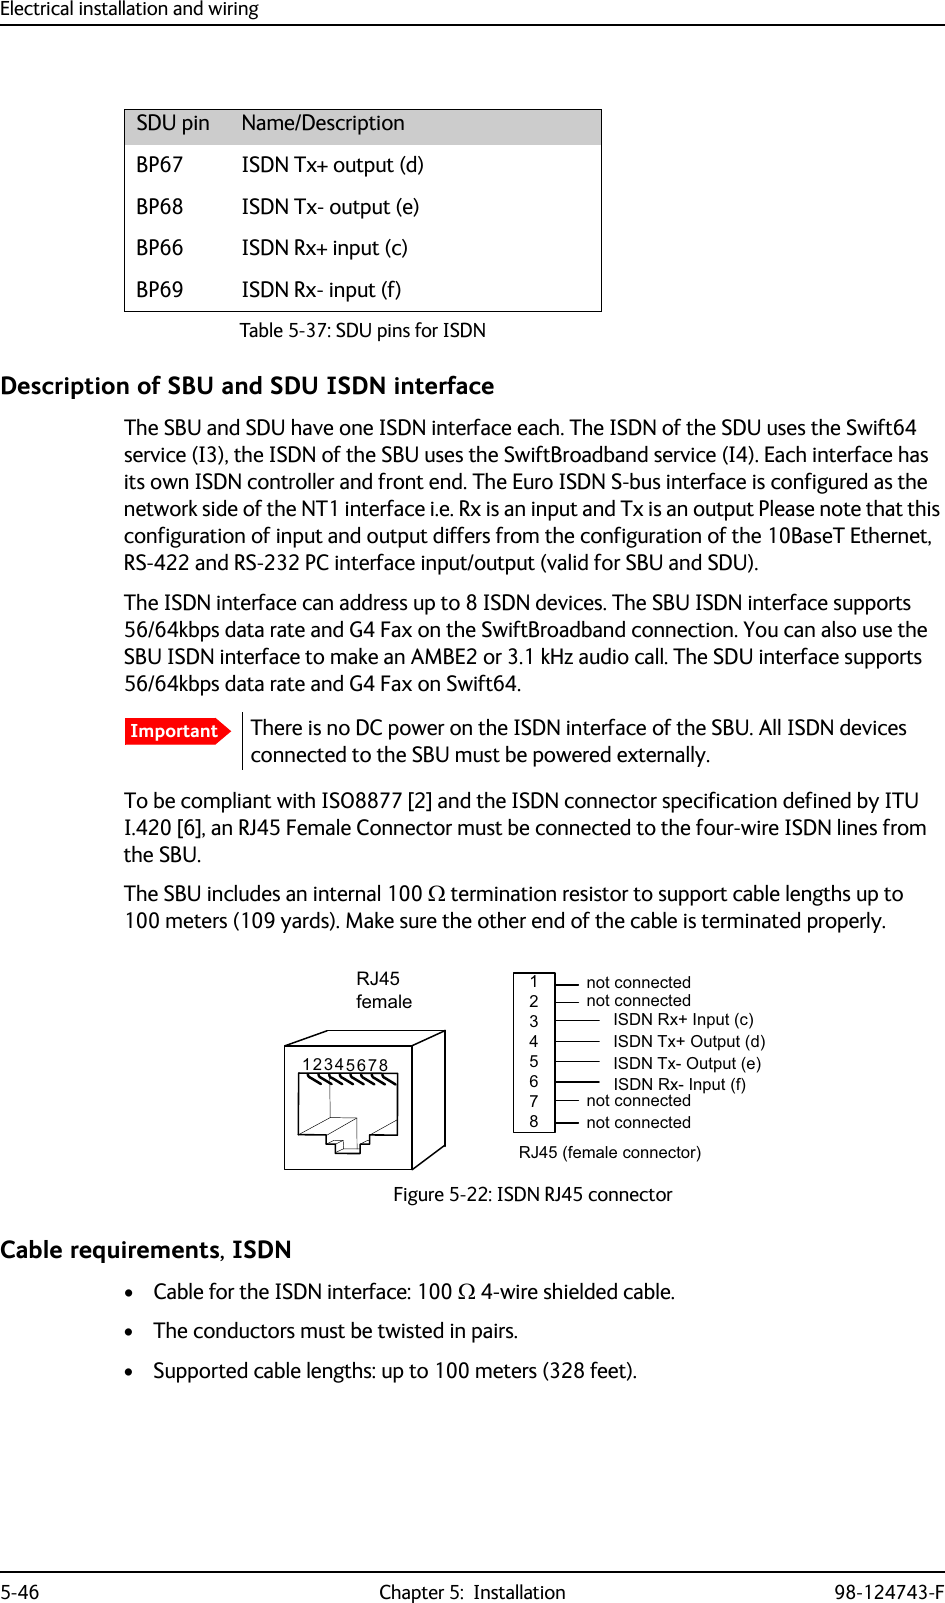 Electrical installation and wiring5-46 Chapter 5:  Installation 98-124743-FDescription of SBU and SDU ISDN interfaceThe SBU and SDU have one ISDN interface each. The ISDN of the SDU uses the Swift64 service (I3), the ISDN of the SBU uses the SwiftBroadband service (I4). Each interface has its own ISDN controller and front end. The Euro ISDN S-bus interface is configured as the network side of the NT1 interface i.e. Rx is an input and Tx is an output Please note that this configuration of input and output differs from the configuration of the 10BaseT Ethernet, RS-422 and RS-232 PC interface input/output (valid for SBU and SDU).The ISDN interface can address up to 8 ISDN devices. The SBU ISDN interface supports 56/64kbps data rate and G4 Fax on the SwiftBroadband connection. You can also use the SBU ISDN interface to make an AMBE2 or 3.1 kHz audio call. The SDU interface supports 56/64kbps data rate and G4 Fax on Swift64.There is no DC power on the ISDN interface of the SBU. All ISDN devices connected to the SBU must be powered externally.To be compliant with ISO8877 [2] and the ISDN connector specification defined by ITU I.420 [6], an RJ45 Female Connector must be connected to the four-wire ISDN lines from the SBU. The SBU includes an internal 100  termination resistor to support cable lengths up to 100 meters (109 yards). Make sure the other end of the cable is terminated properly.Cable requirements, ISDN• Cable for the ISDN interface: 100  4-wire shielded cable.• The conductors must be twisted in pairs.• Supported cable lengths: up to 100 meters (328 feet).SDU pin Name/DescriptionBP67 ISDN Tx+ output (d)BP68 ISDN Tx- output (e)BP66 ISDN Rx+ input (c)BP69 ISDN Rx- input (f)Table 5-37: SDU pins for ISDNImportantFigure 5-22: ISDN RJ45 connector,6&apos;15[,QSXWF,6&apos;17[2XWSXWG,6&apos;17[2XWSXWH,6&apos;15[,QSXWIQRWFRQQHFWHG5-IHPDOHFRQQHFWRUQRWFRQQHFWHGQRWFRQQHFWHGQRWFRQQHFWHG5-IHPDOH